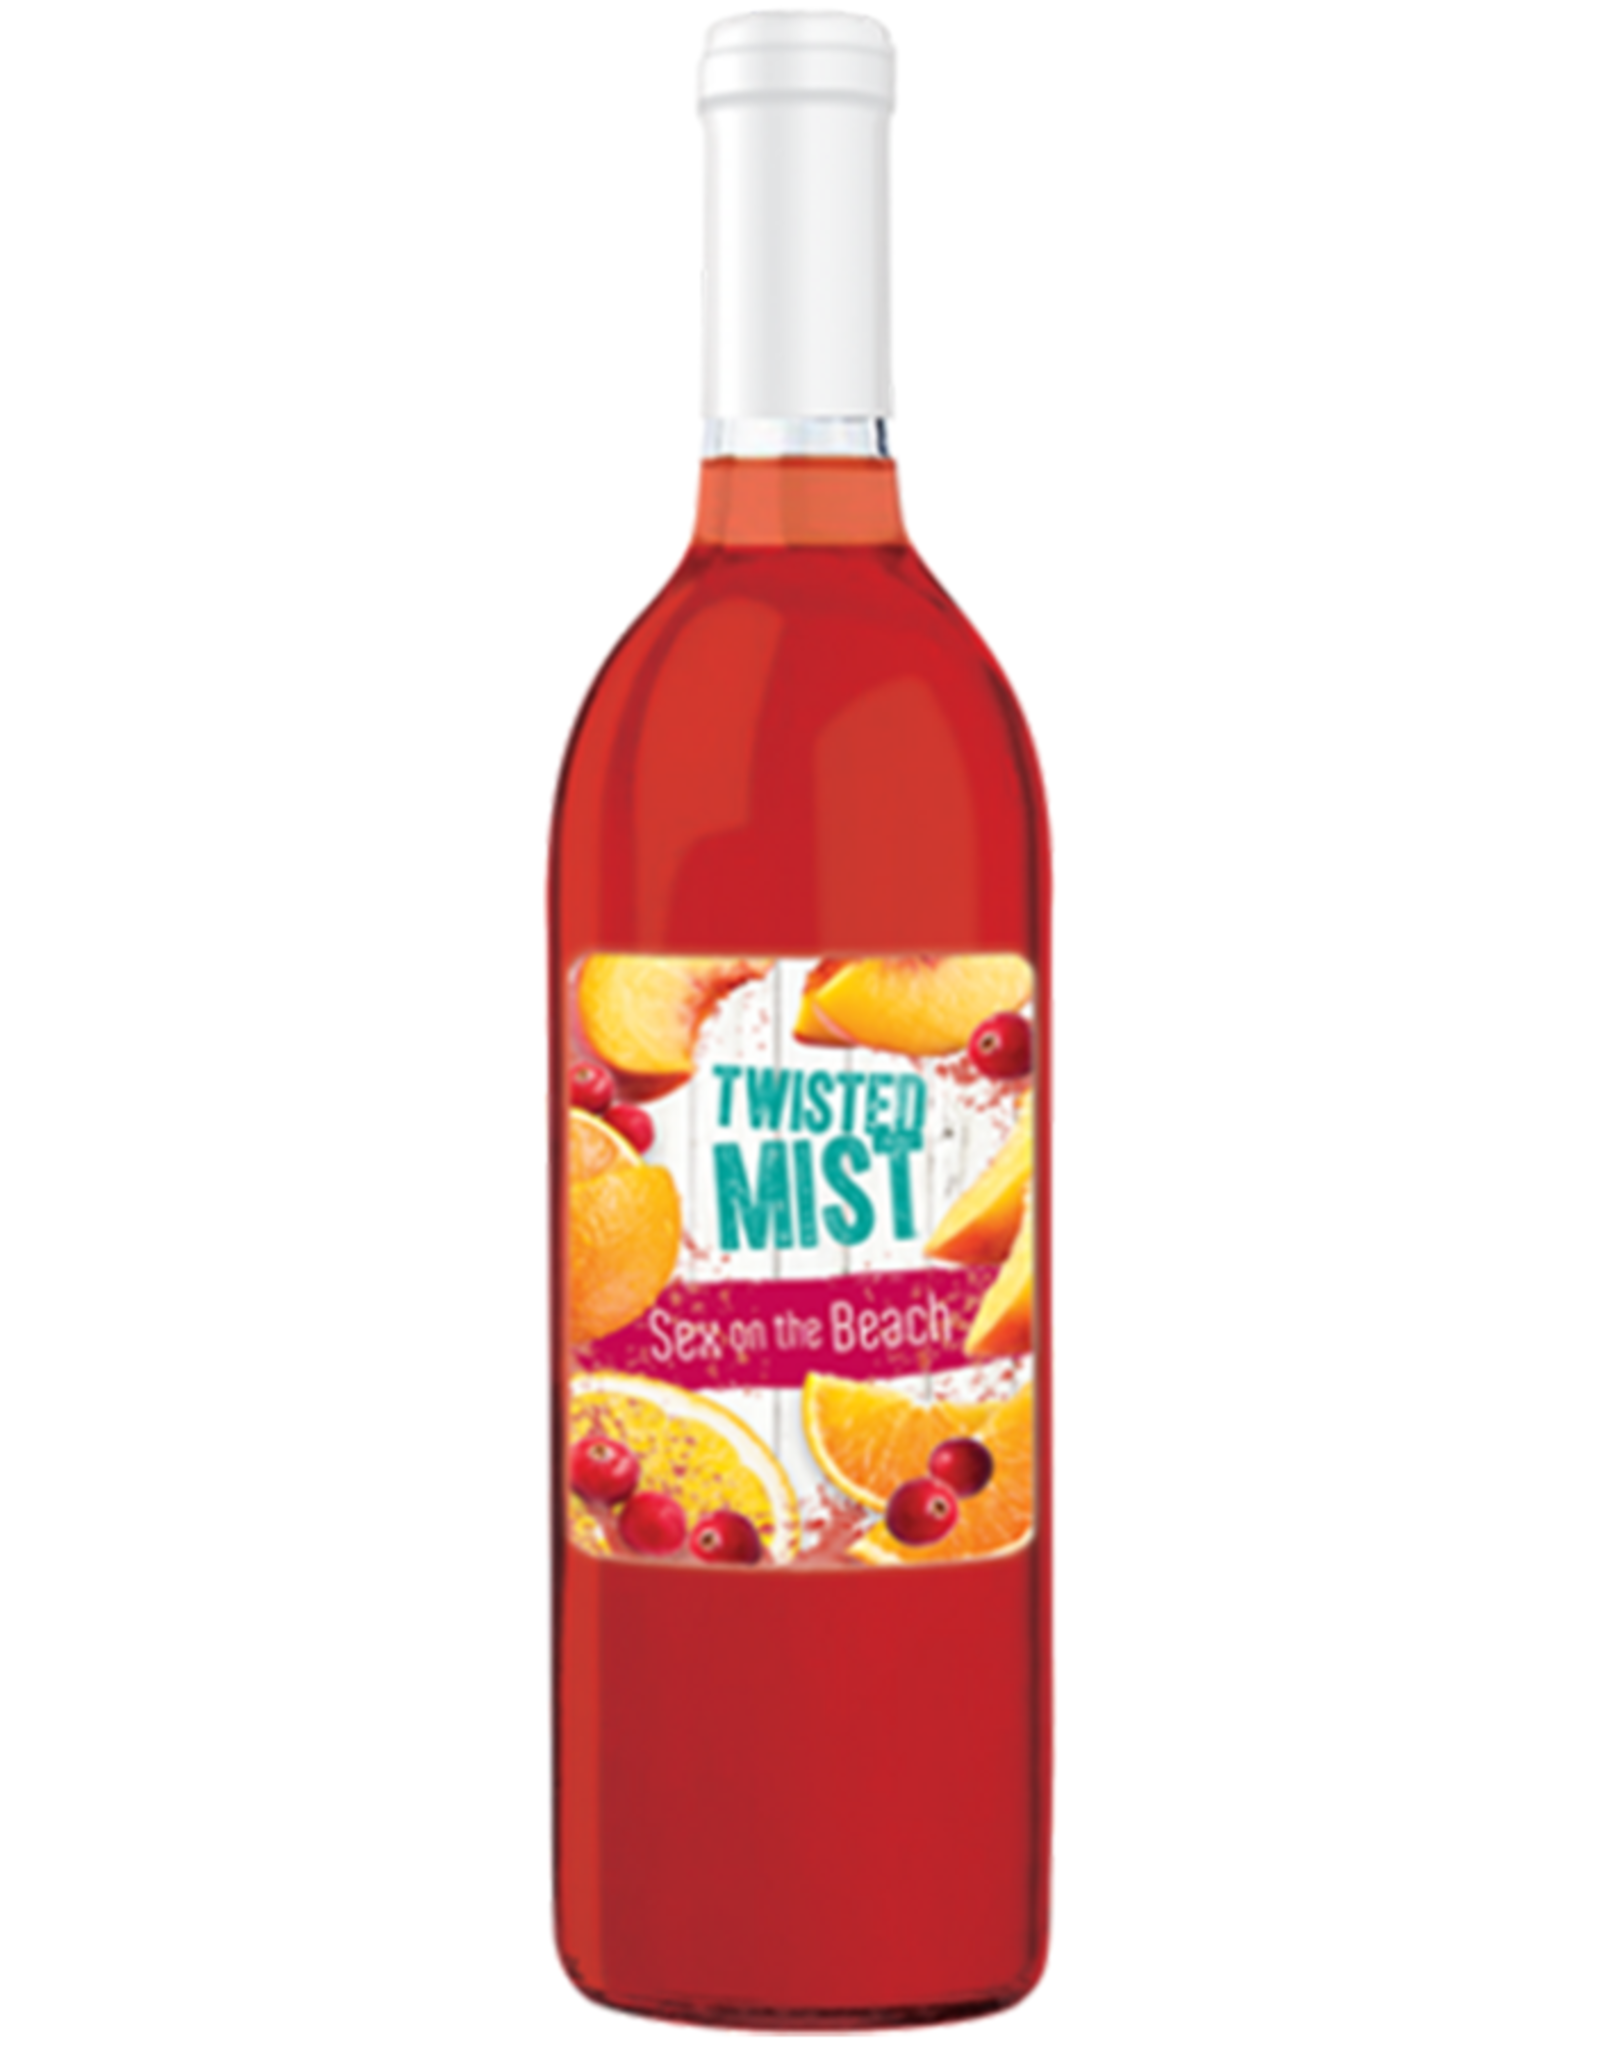 LIMITED RELEASE SEX ON THE BEACH TWISTED MIST PREMIUM 7.5L WINE KIT